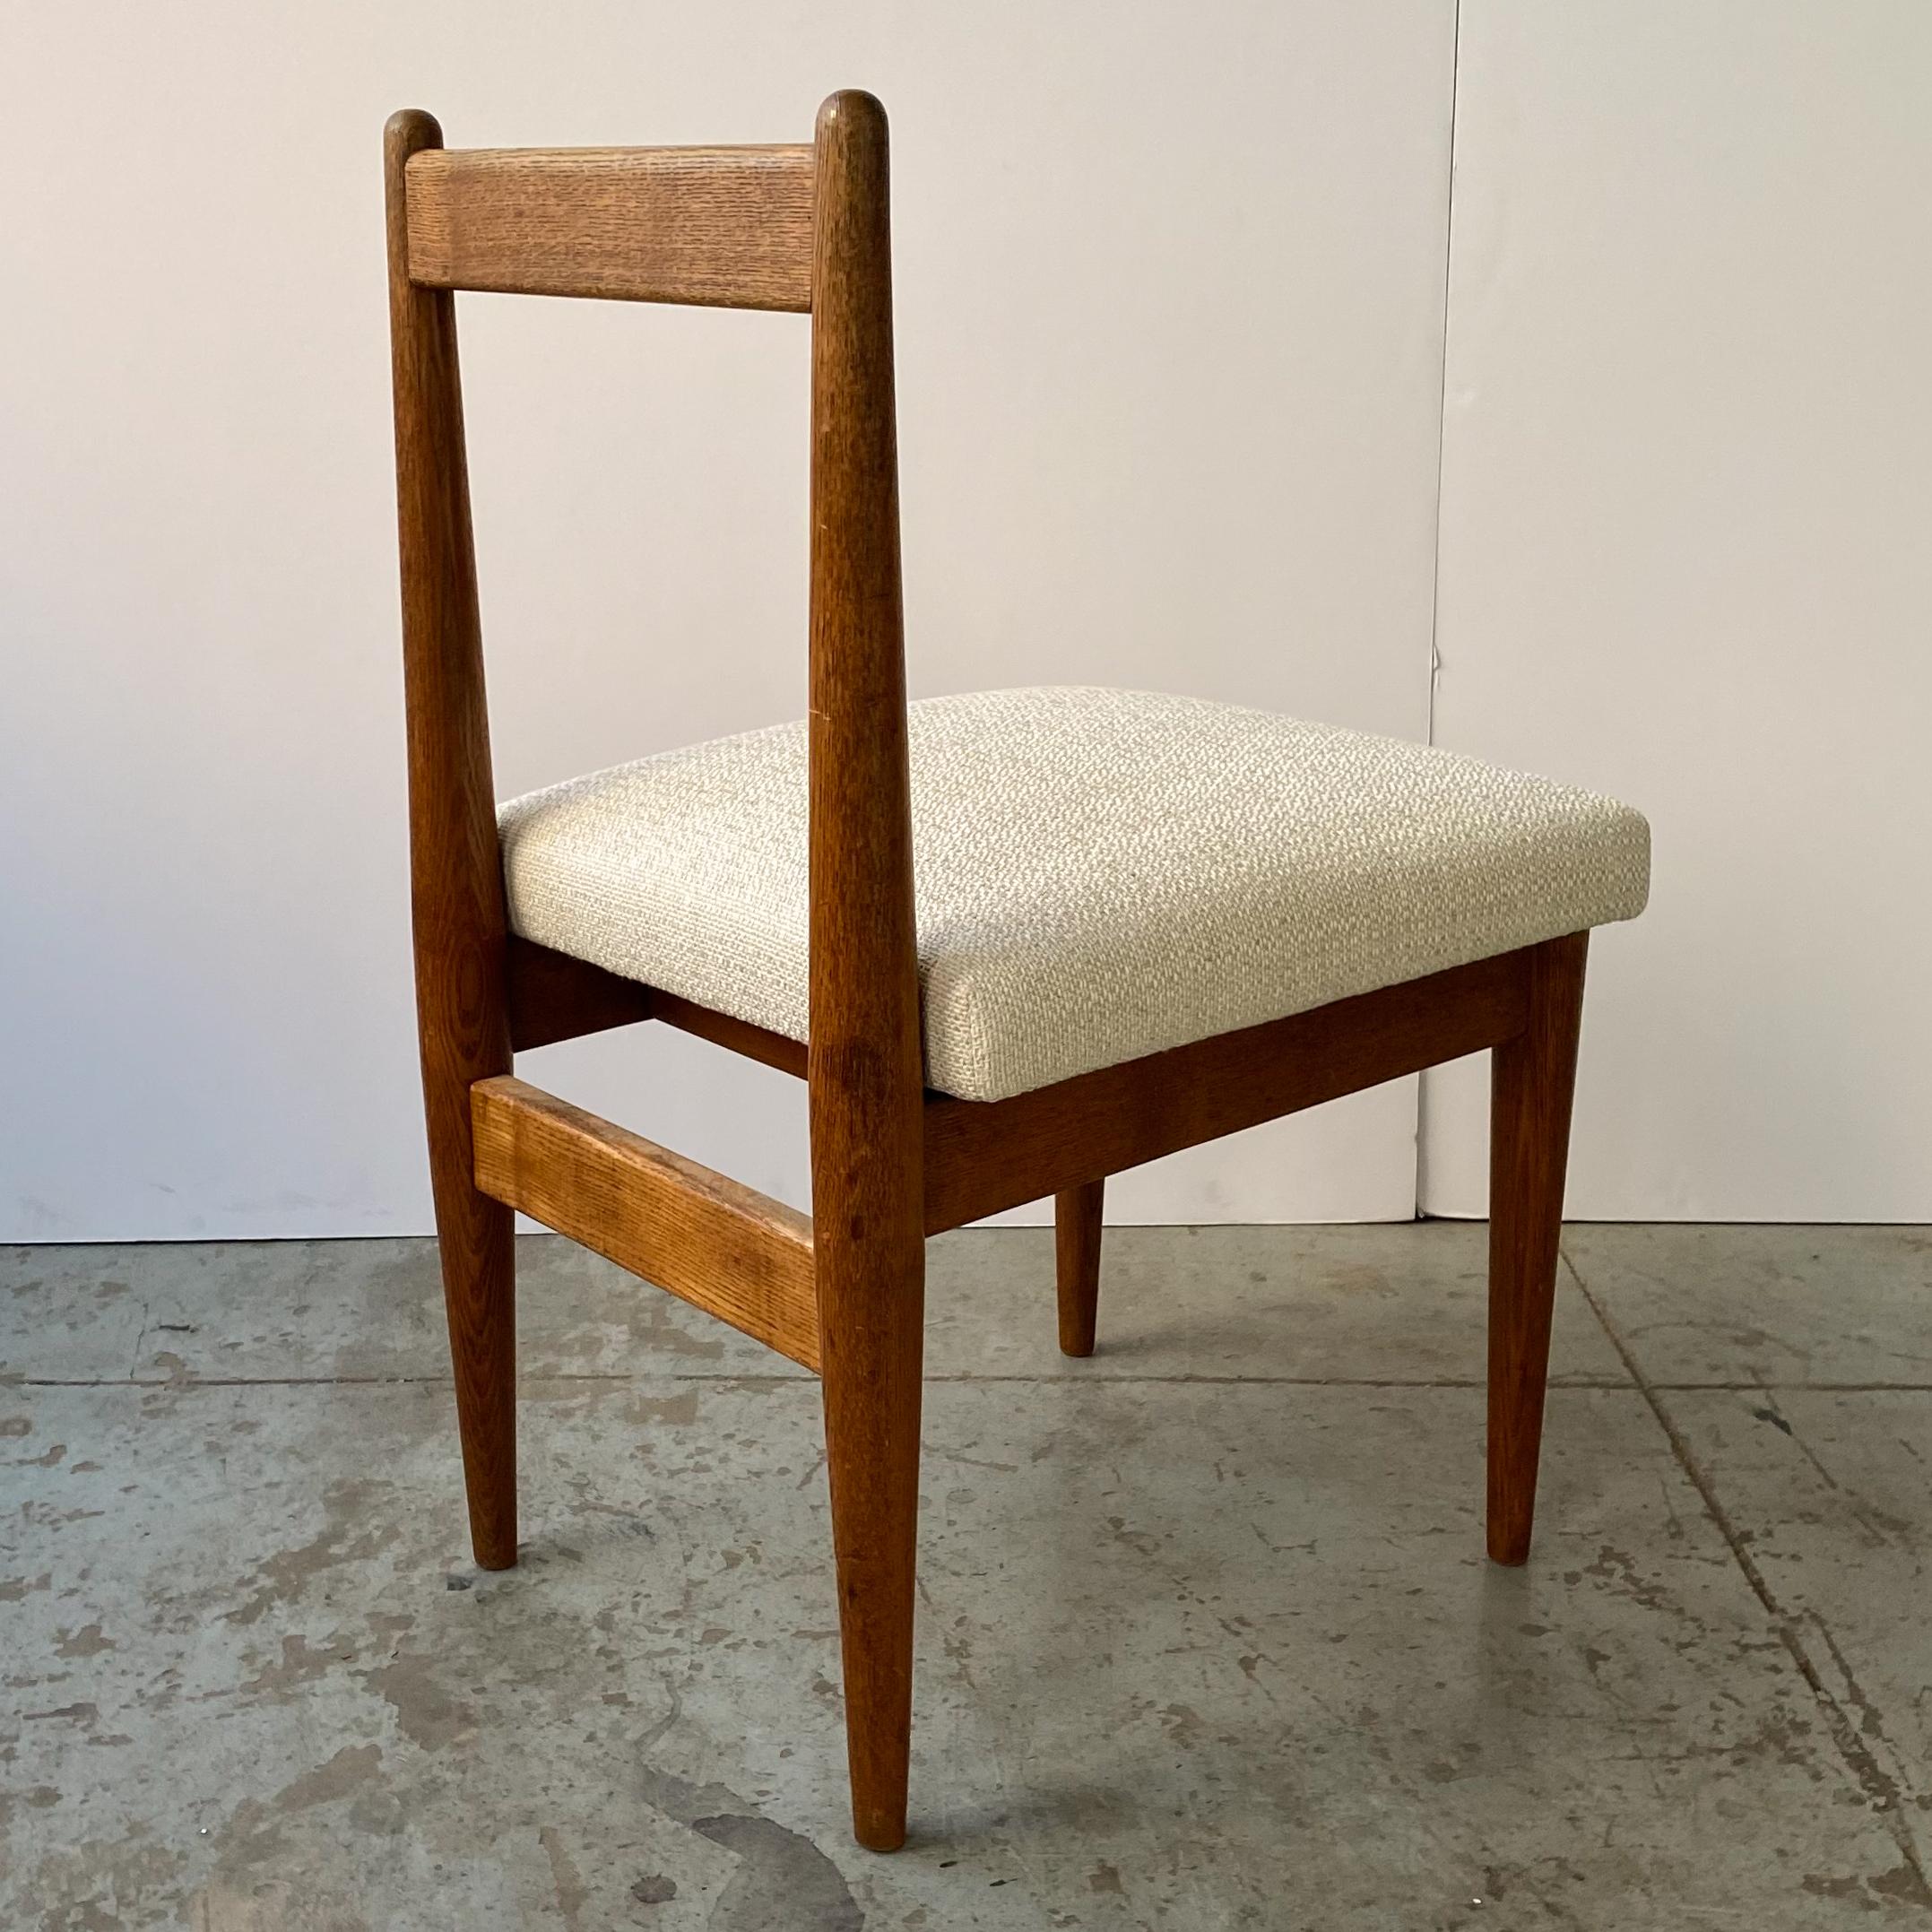 Mid-20th Century Set of Four Chairs by Katsuo Matsumura